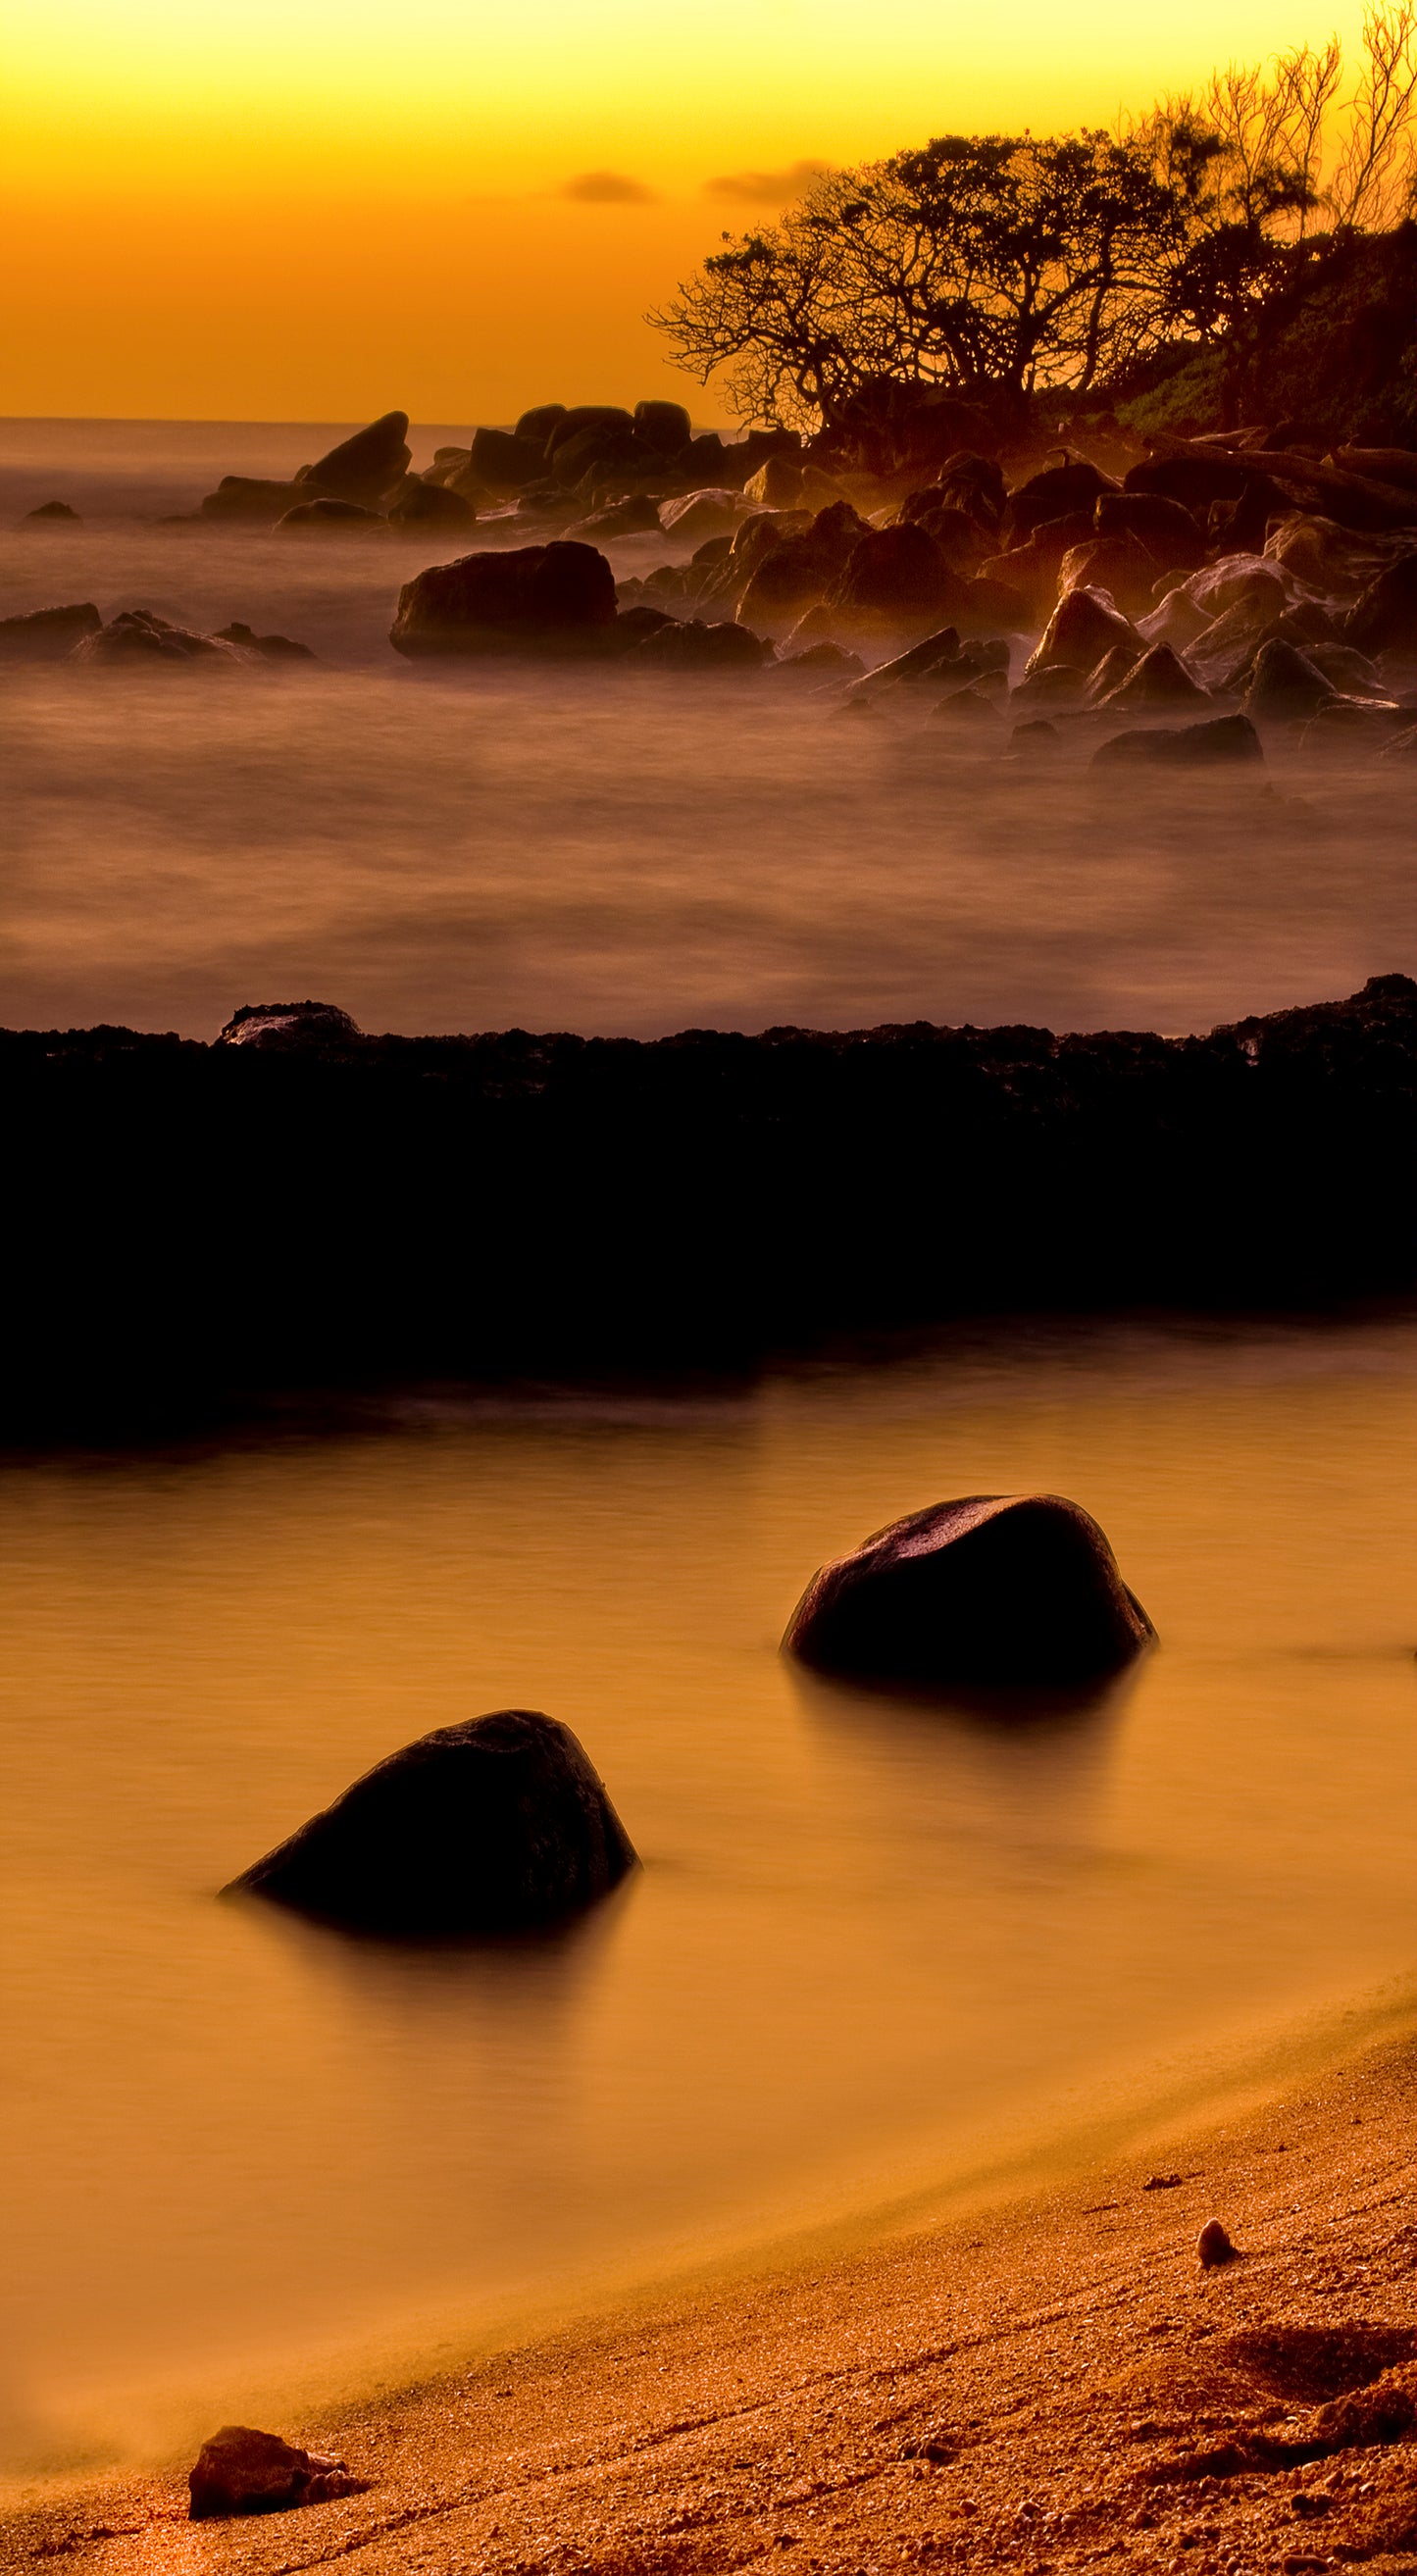 The sky and ocean glow orange at sunrise at a rocky beach on Kauai. Fine art landscape photograph by Inspiring Images Hawaii.